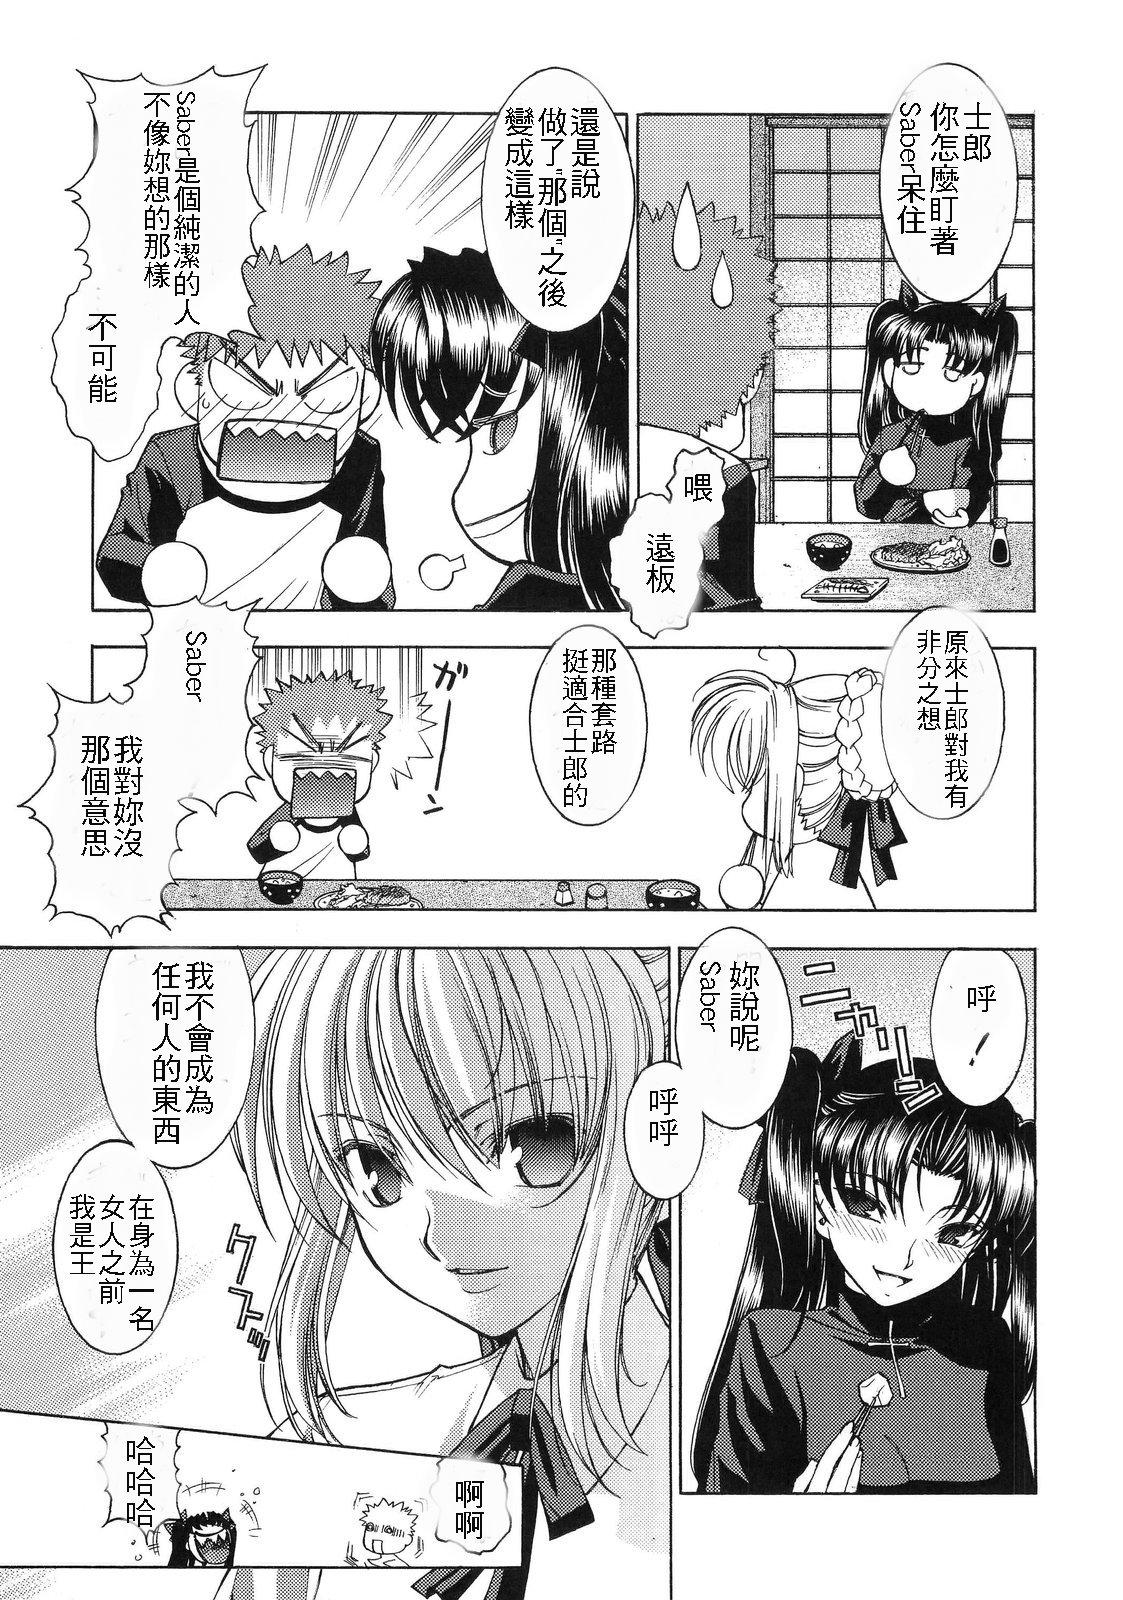 Fuck Atomic-S - Fate stay night Mas - Page 4